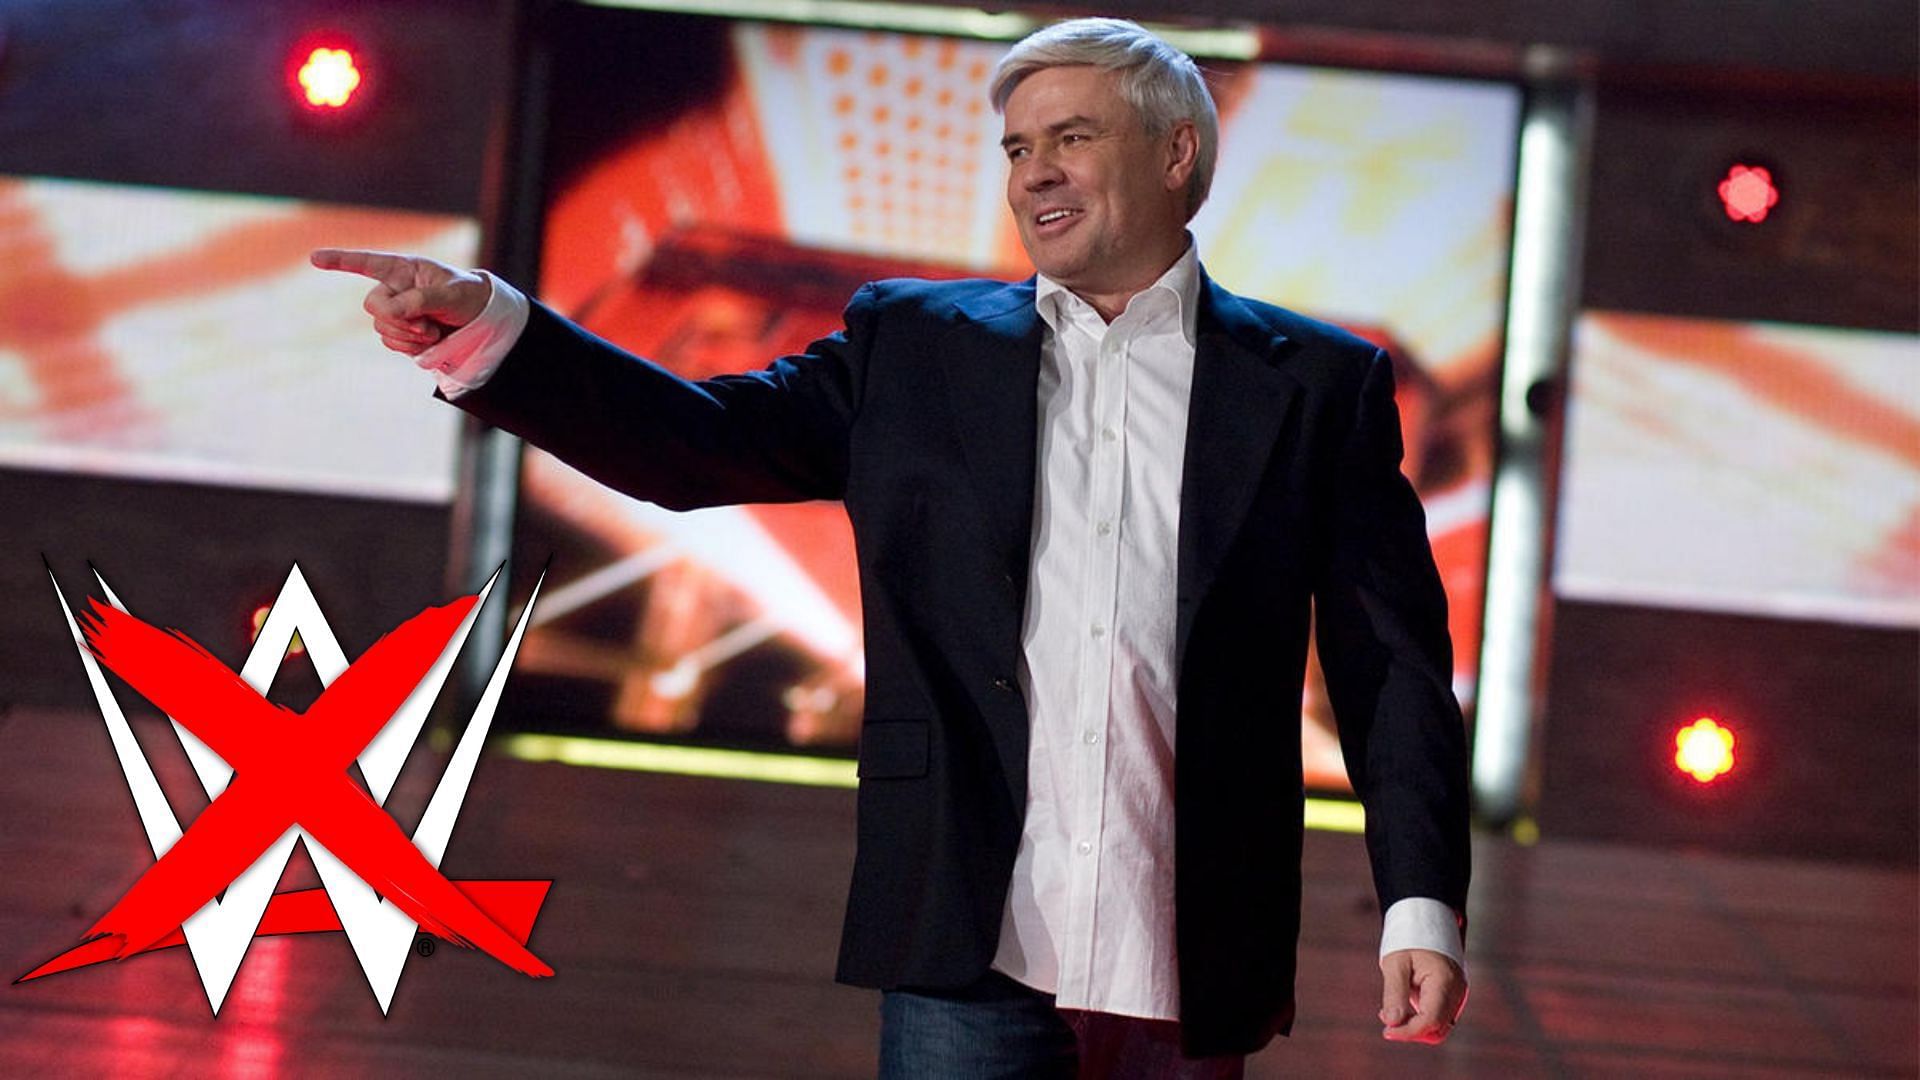 Eric Bischoff has decades of experience in the wrestling industry.